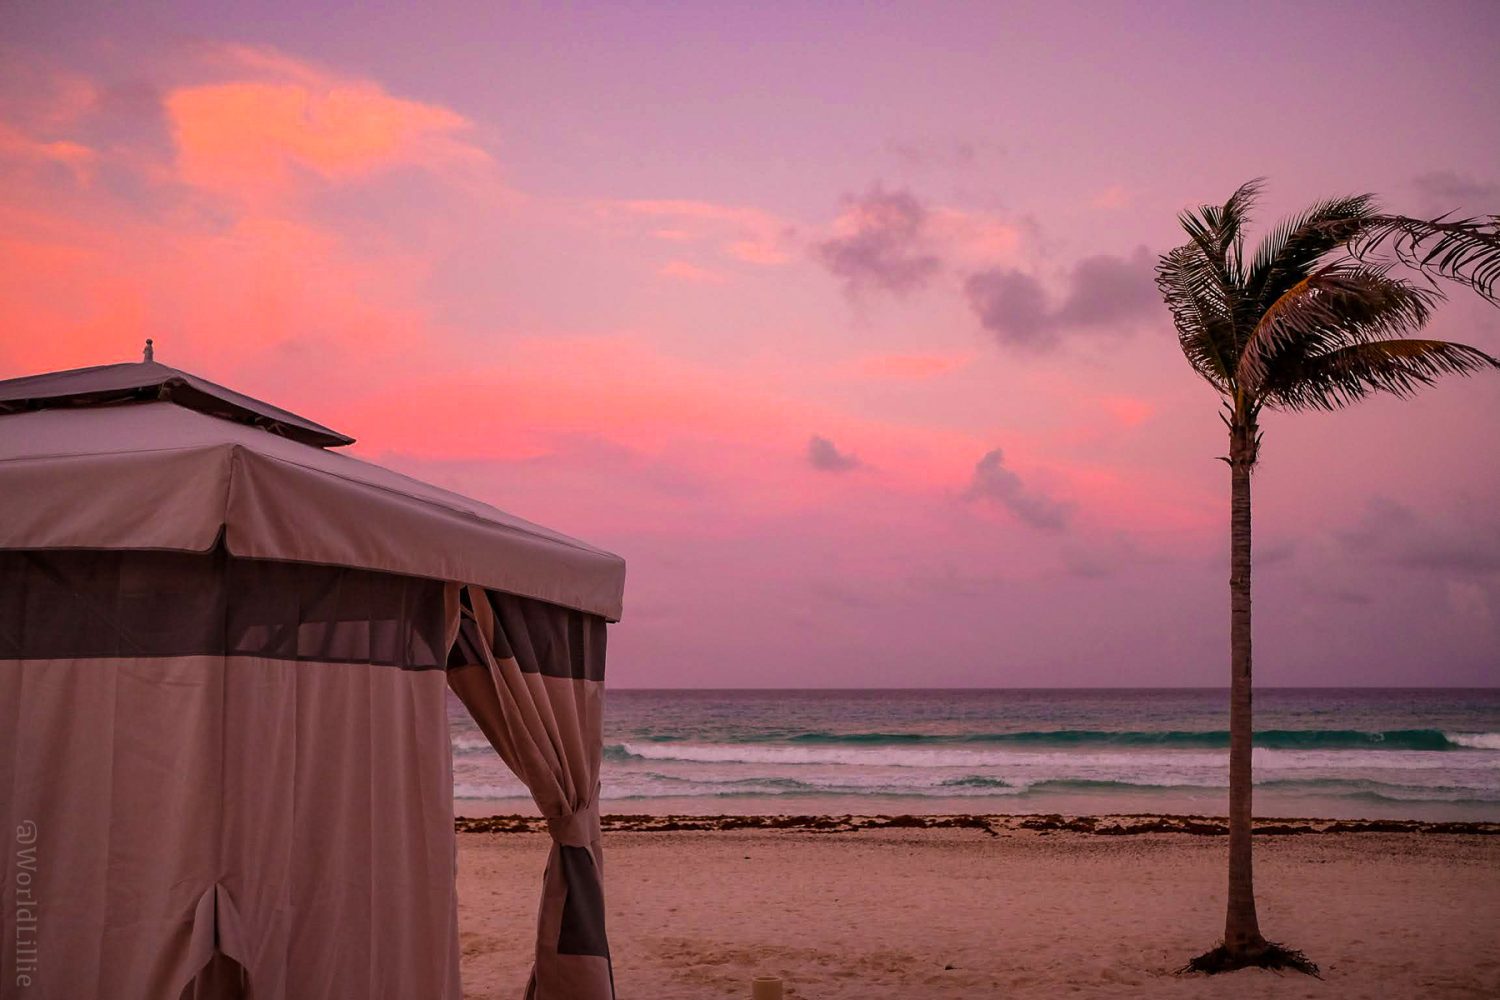 You can book one of these tents for oceanside dining.